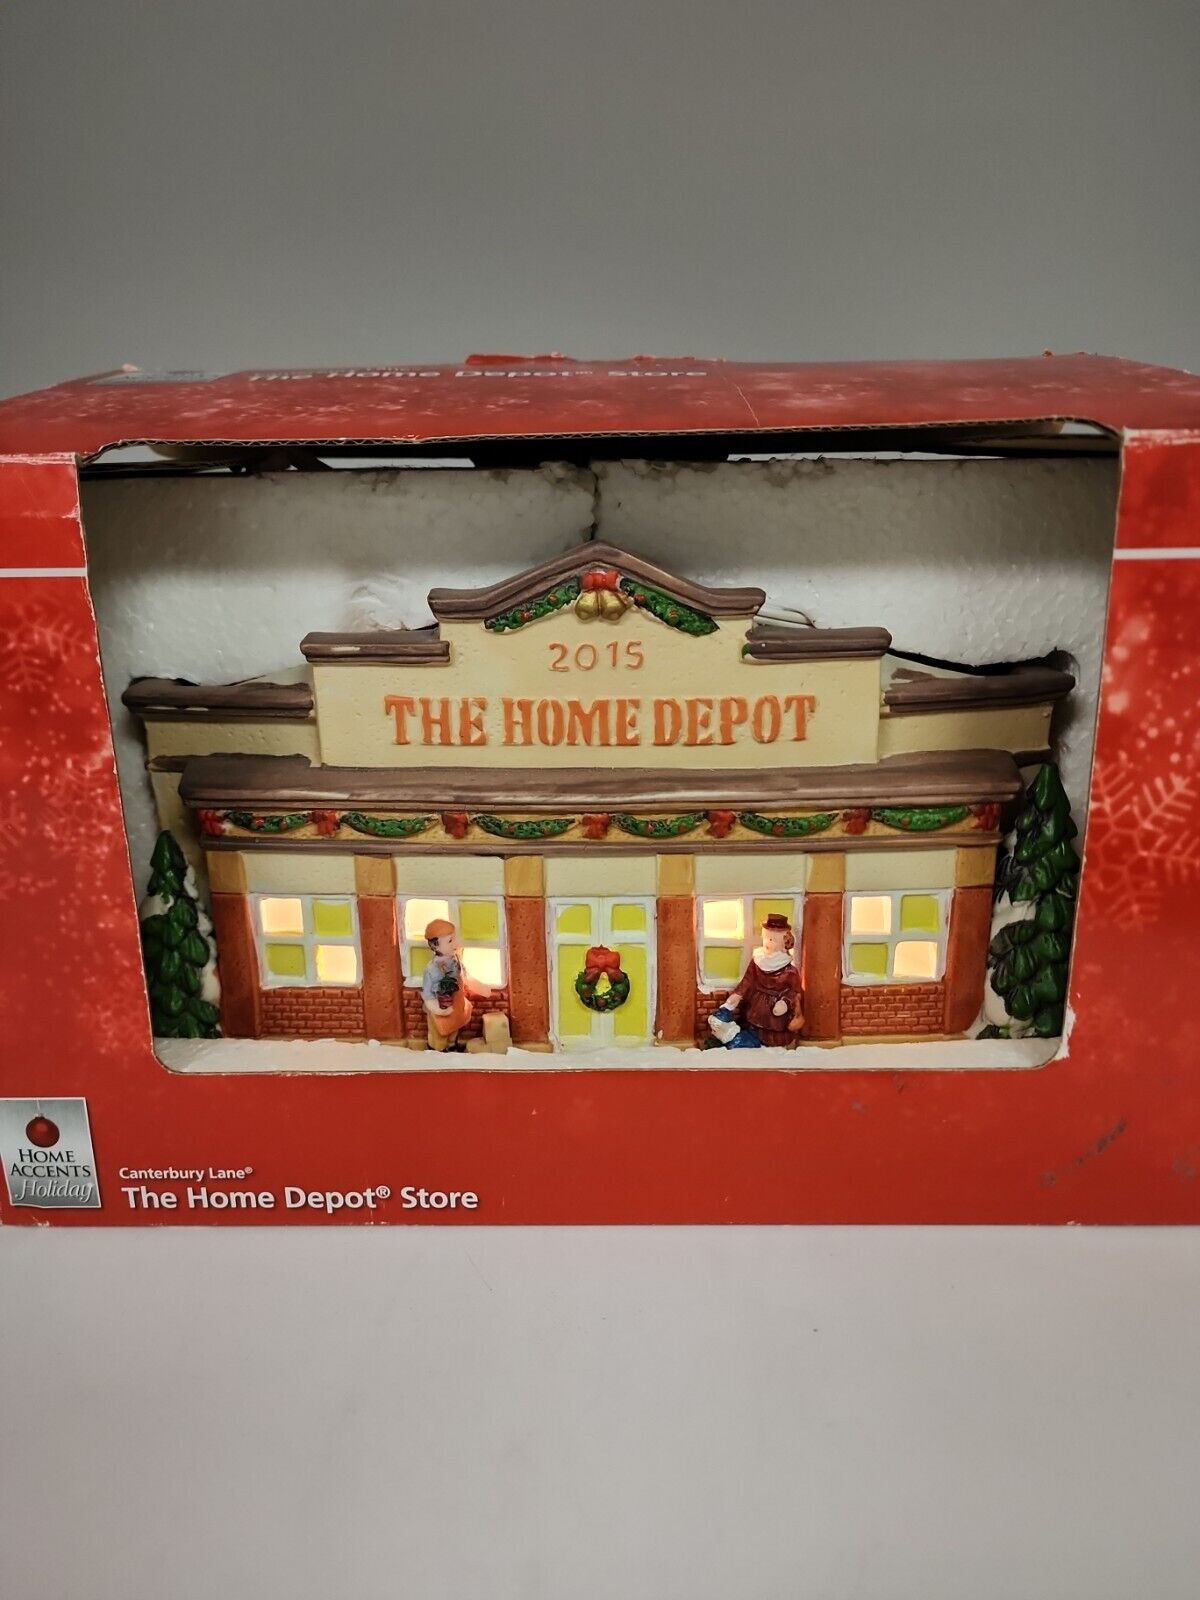 Canterbury Lane Home Accents Holiday Lights Up Home Depot Store 2015 Box Works